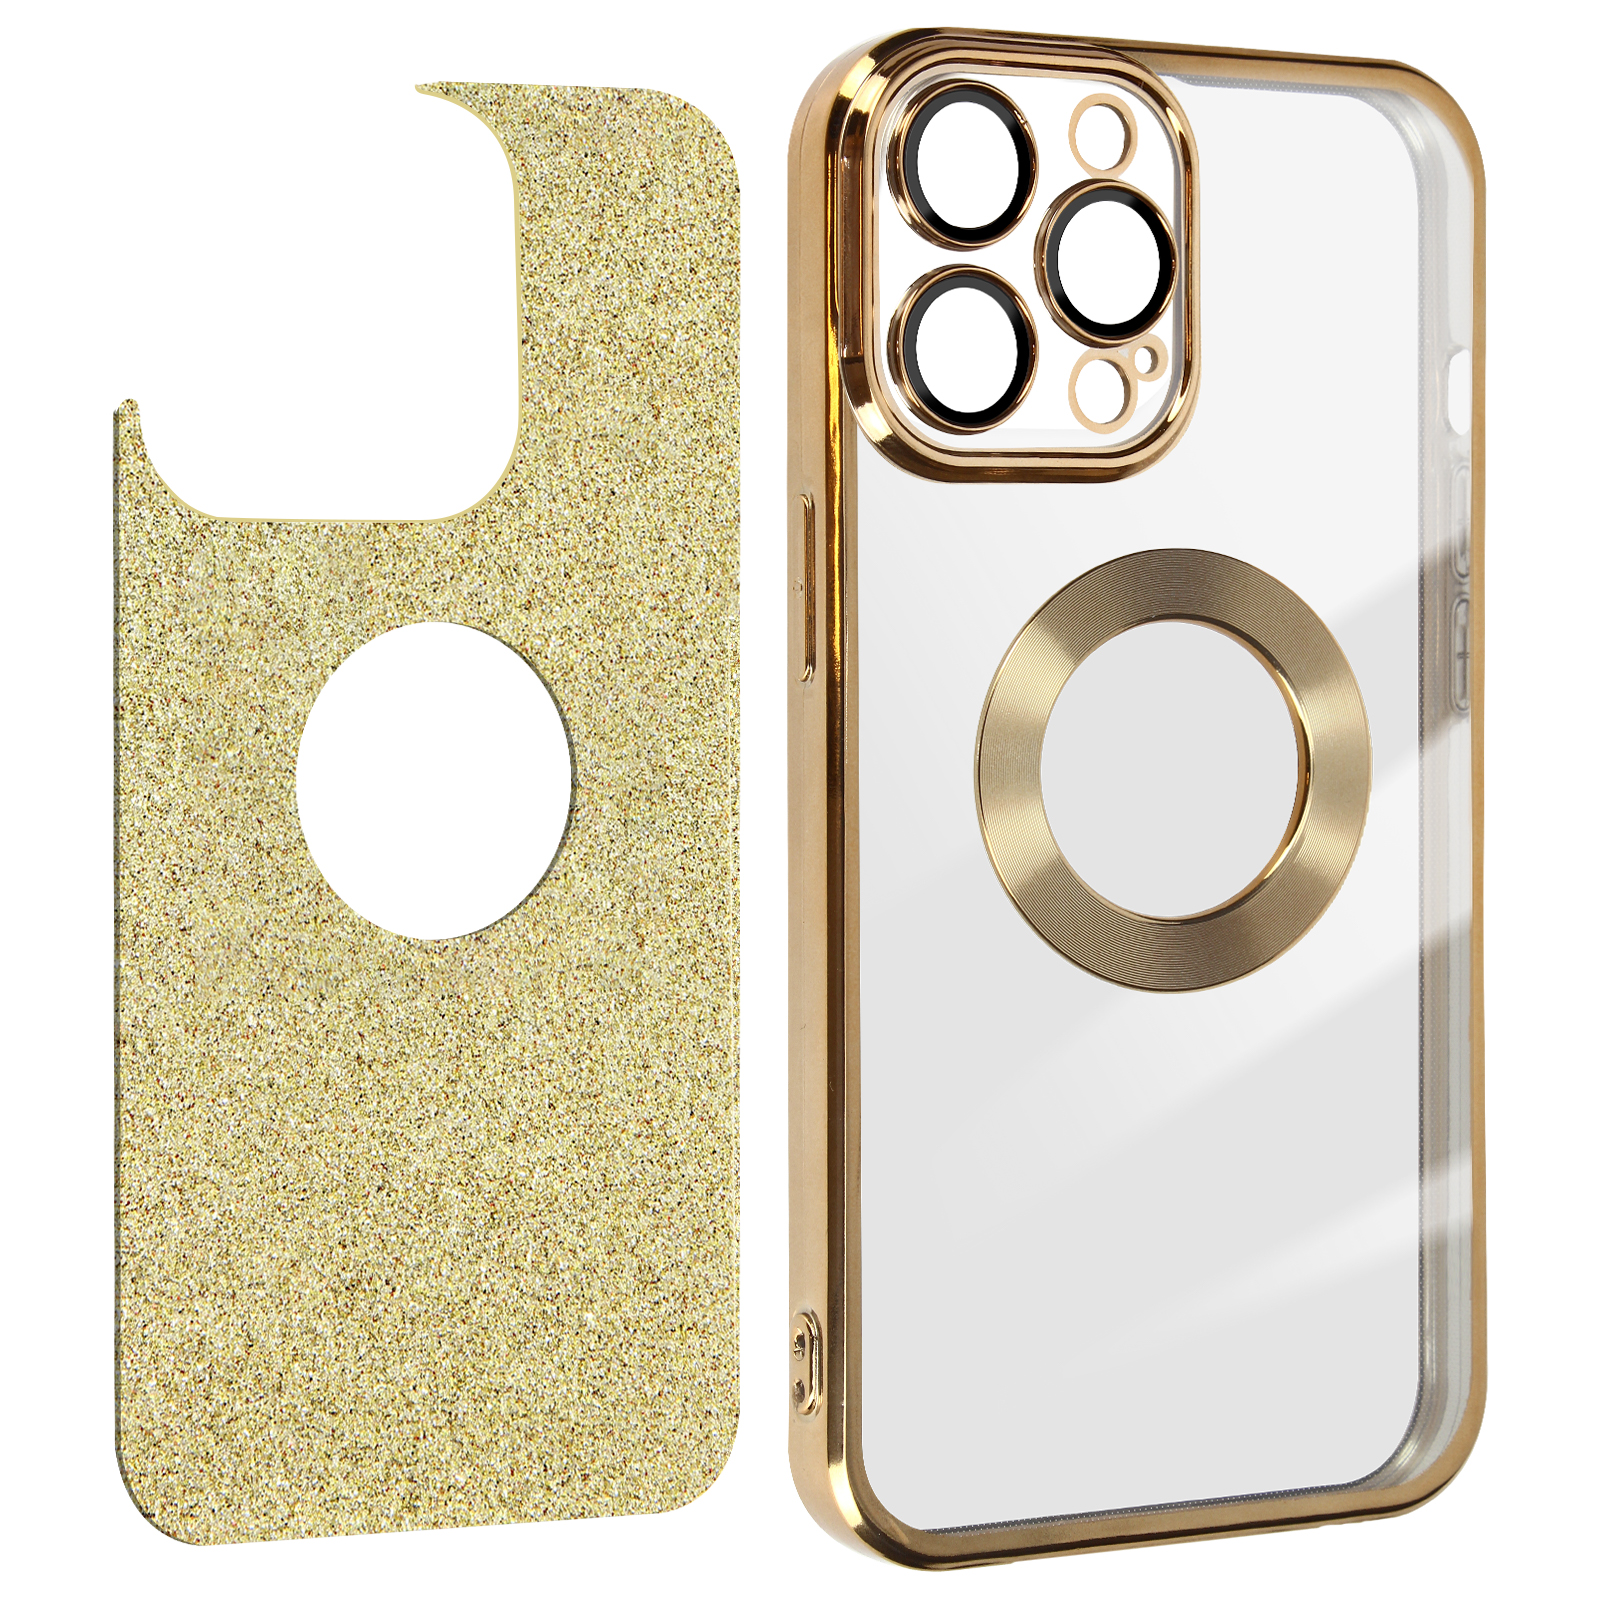 Gold Backcover, AVIZAR Protecam Pro, 12 Series, iPhone Apple, Spark